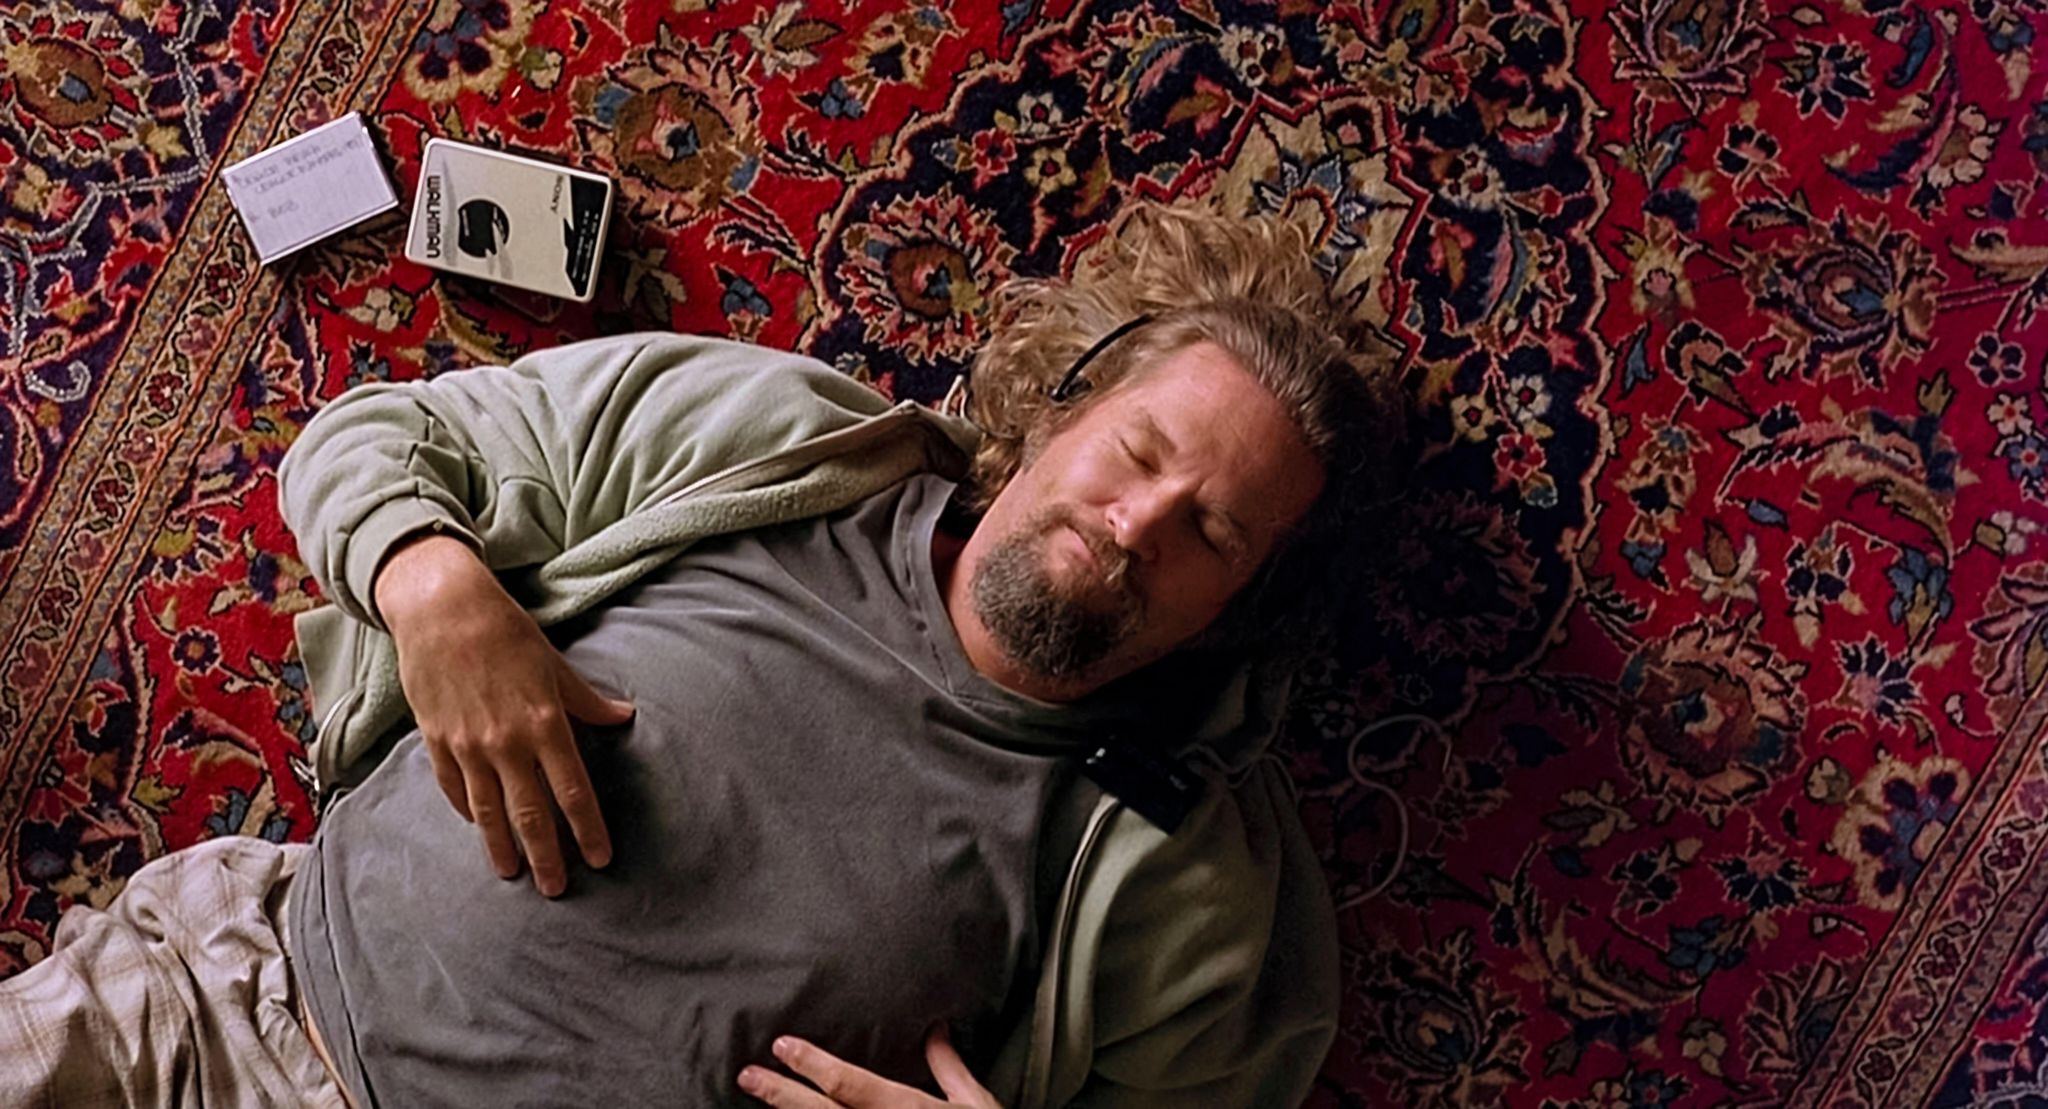 2axdt9c the big lebowski 1998 directed by joel and ethan coen and starring jeff bridges as jeffrey the dude lebowski shown relaxing on his new rug